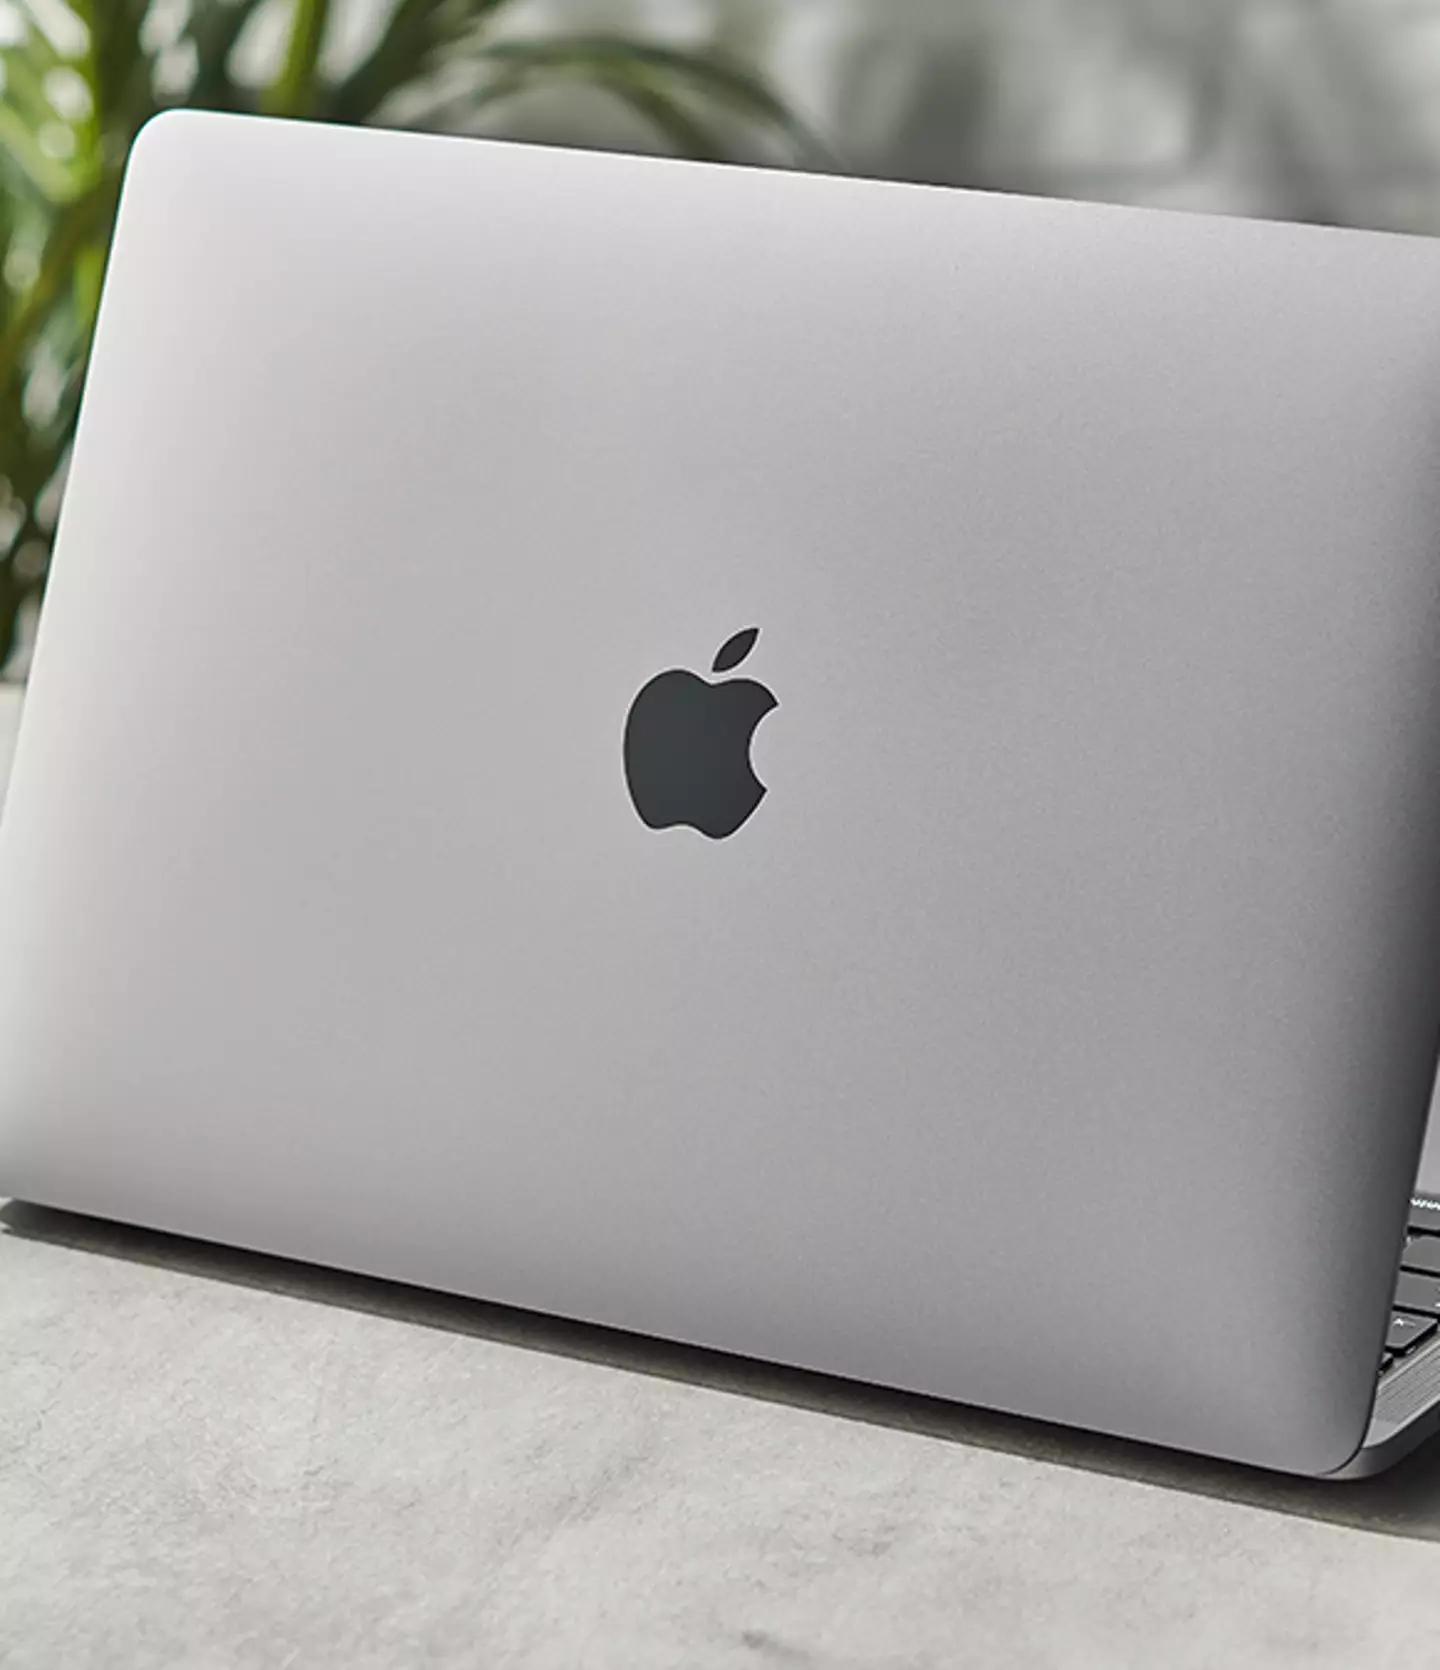 Apple's slimmest MacBoook couldn't maintain the Apple cutout / /Apple Bookazine/Getty Images